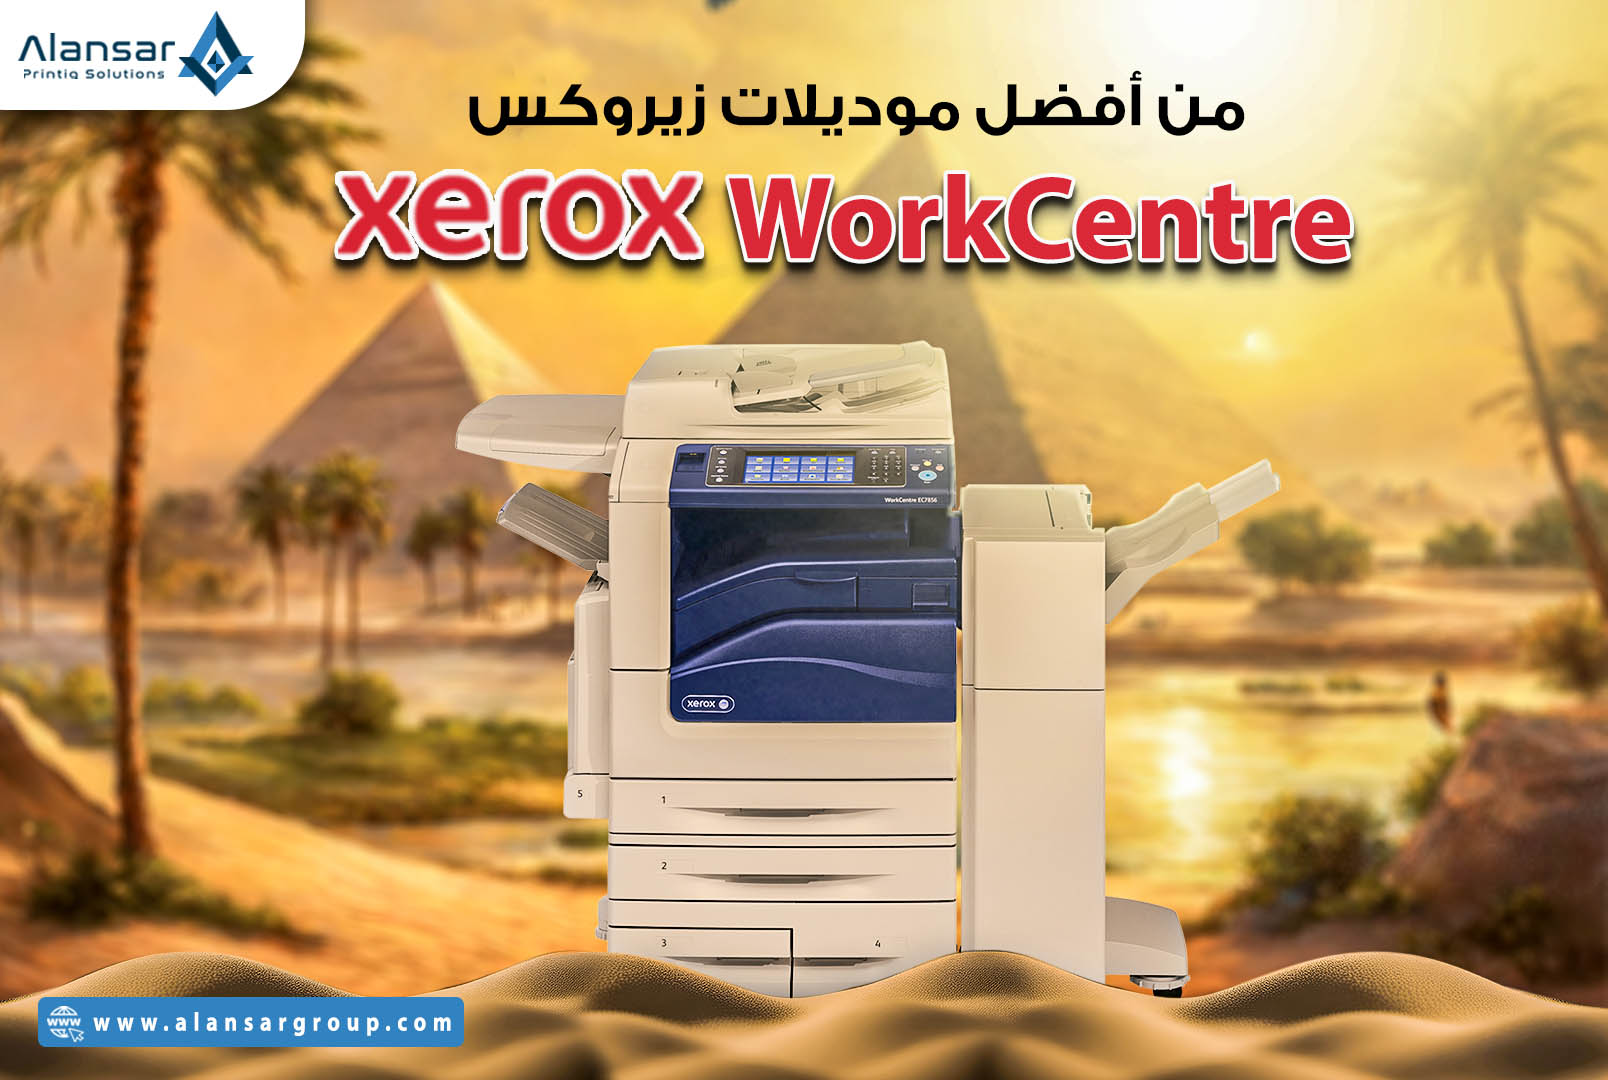 The best printers from the Xerox WorkCentre model